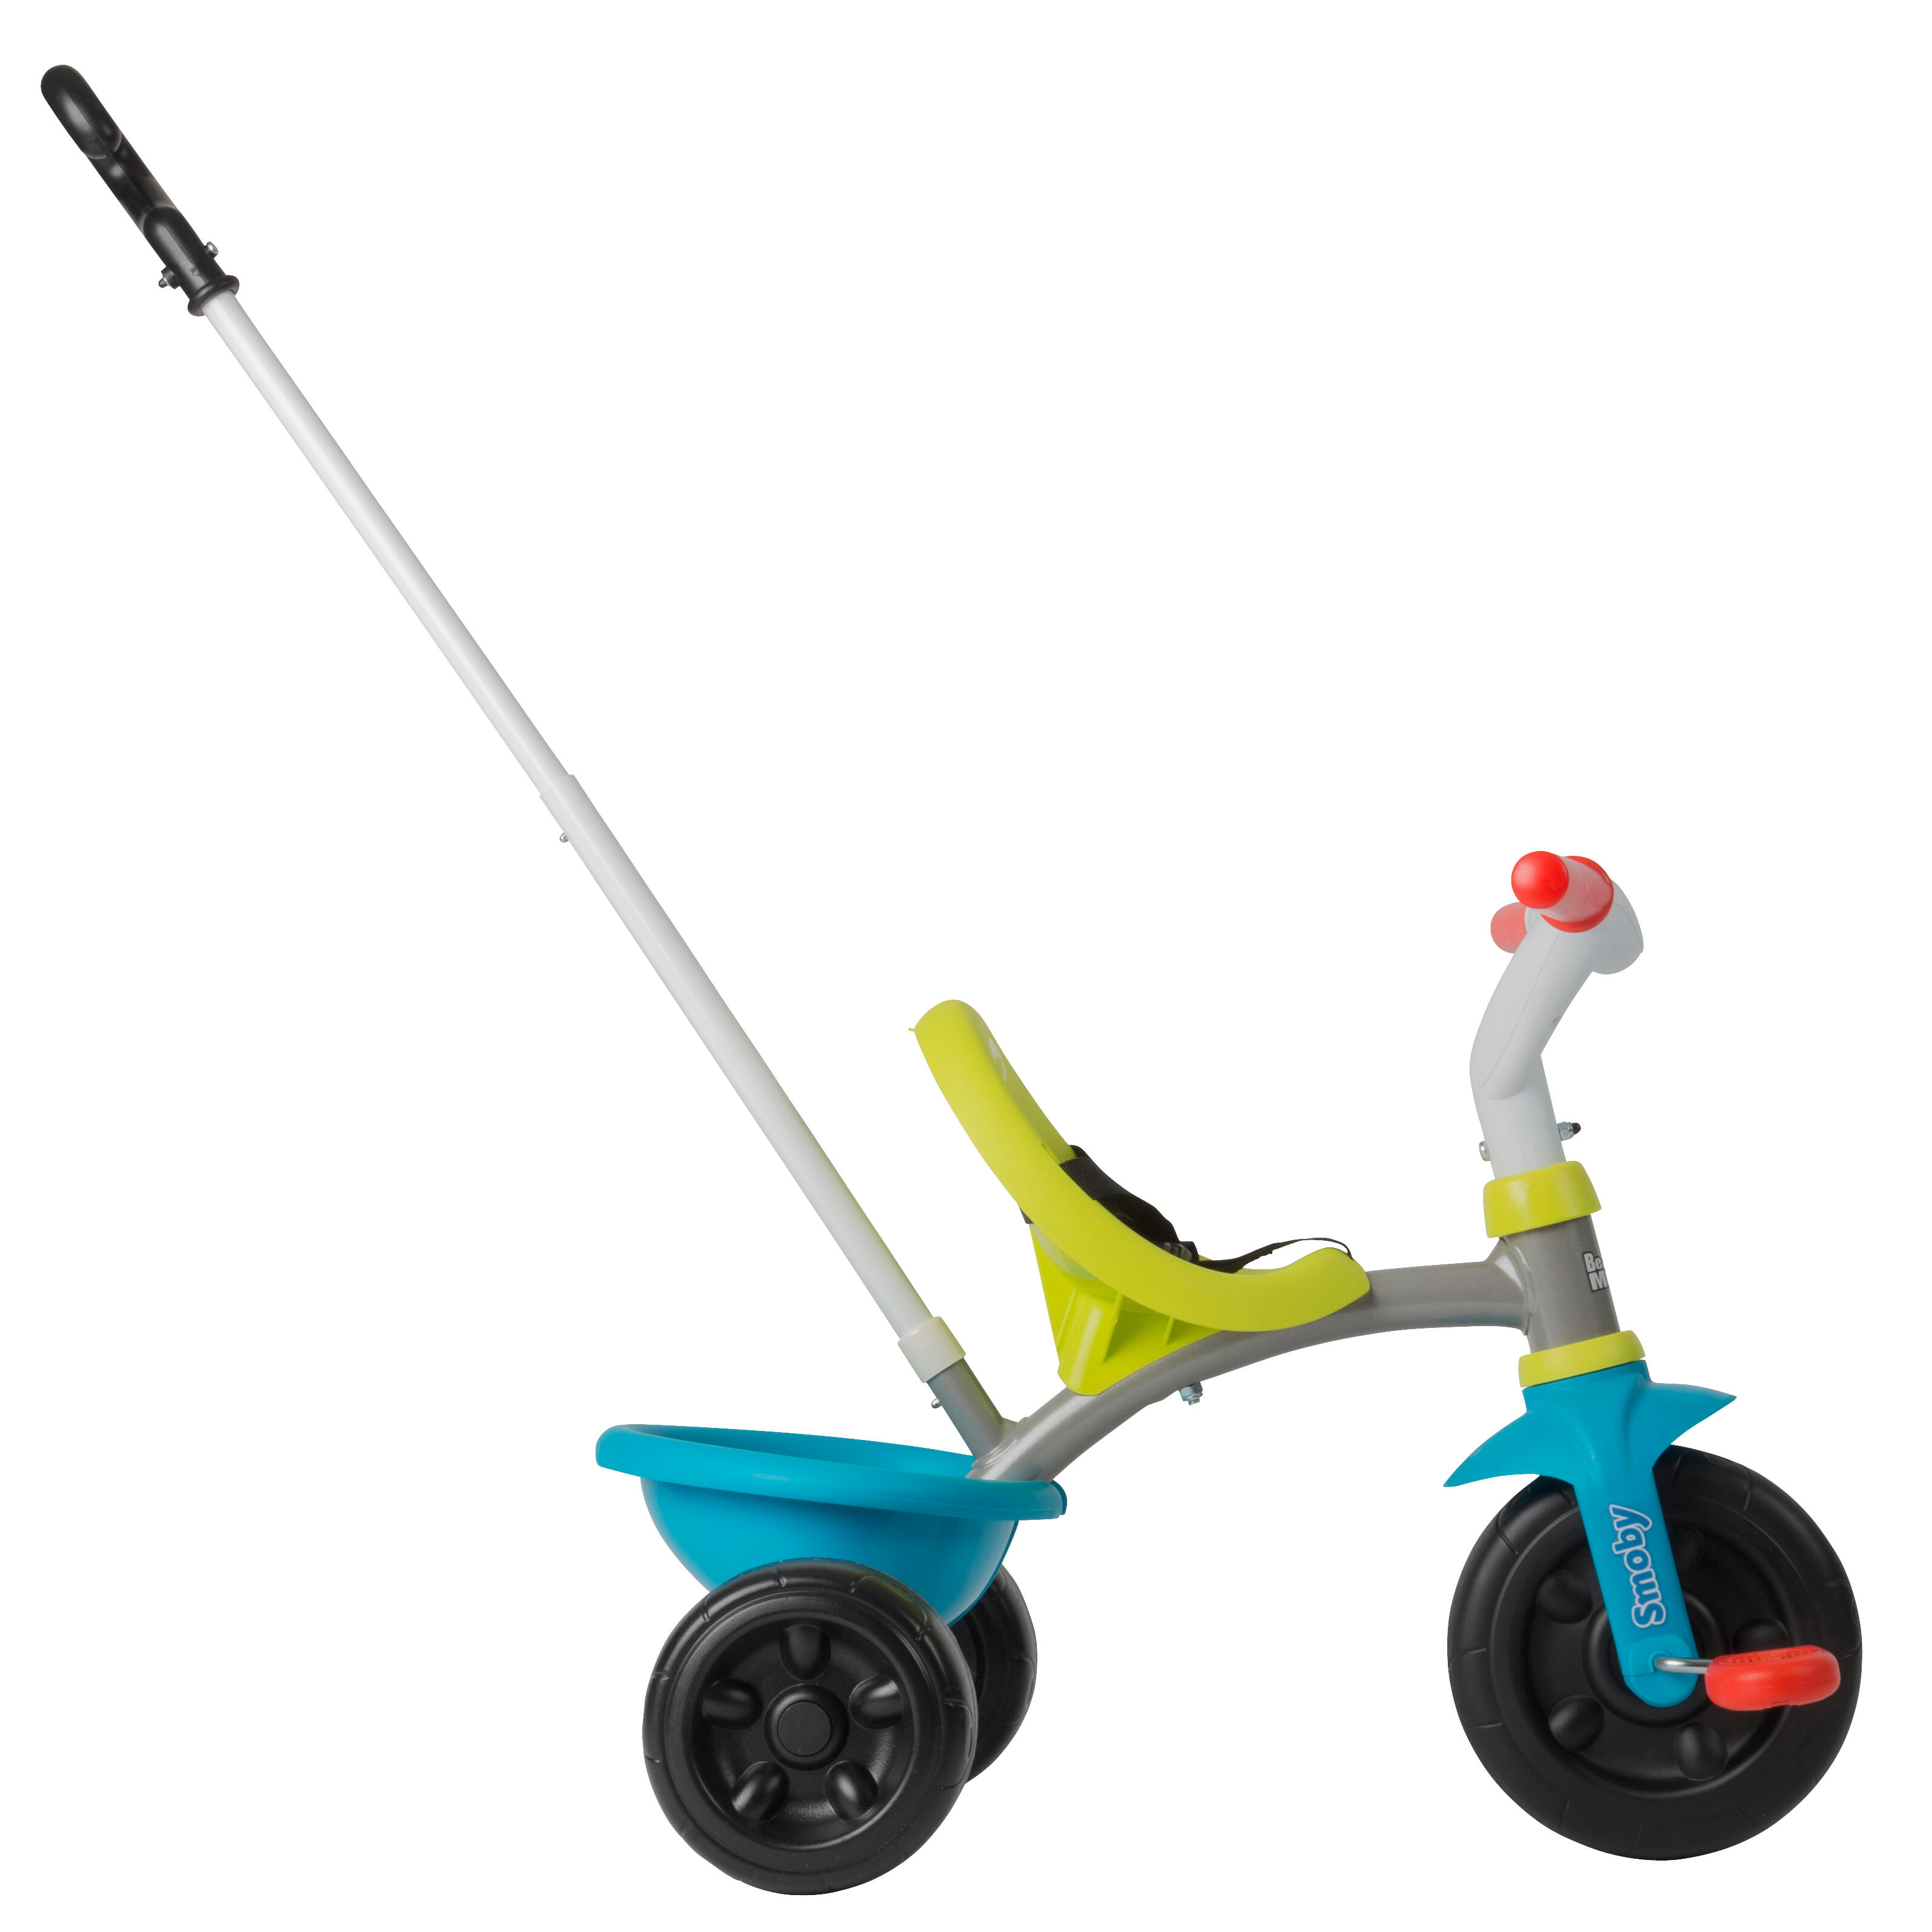 smoby be fun tricycle